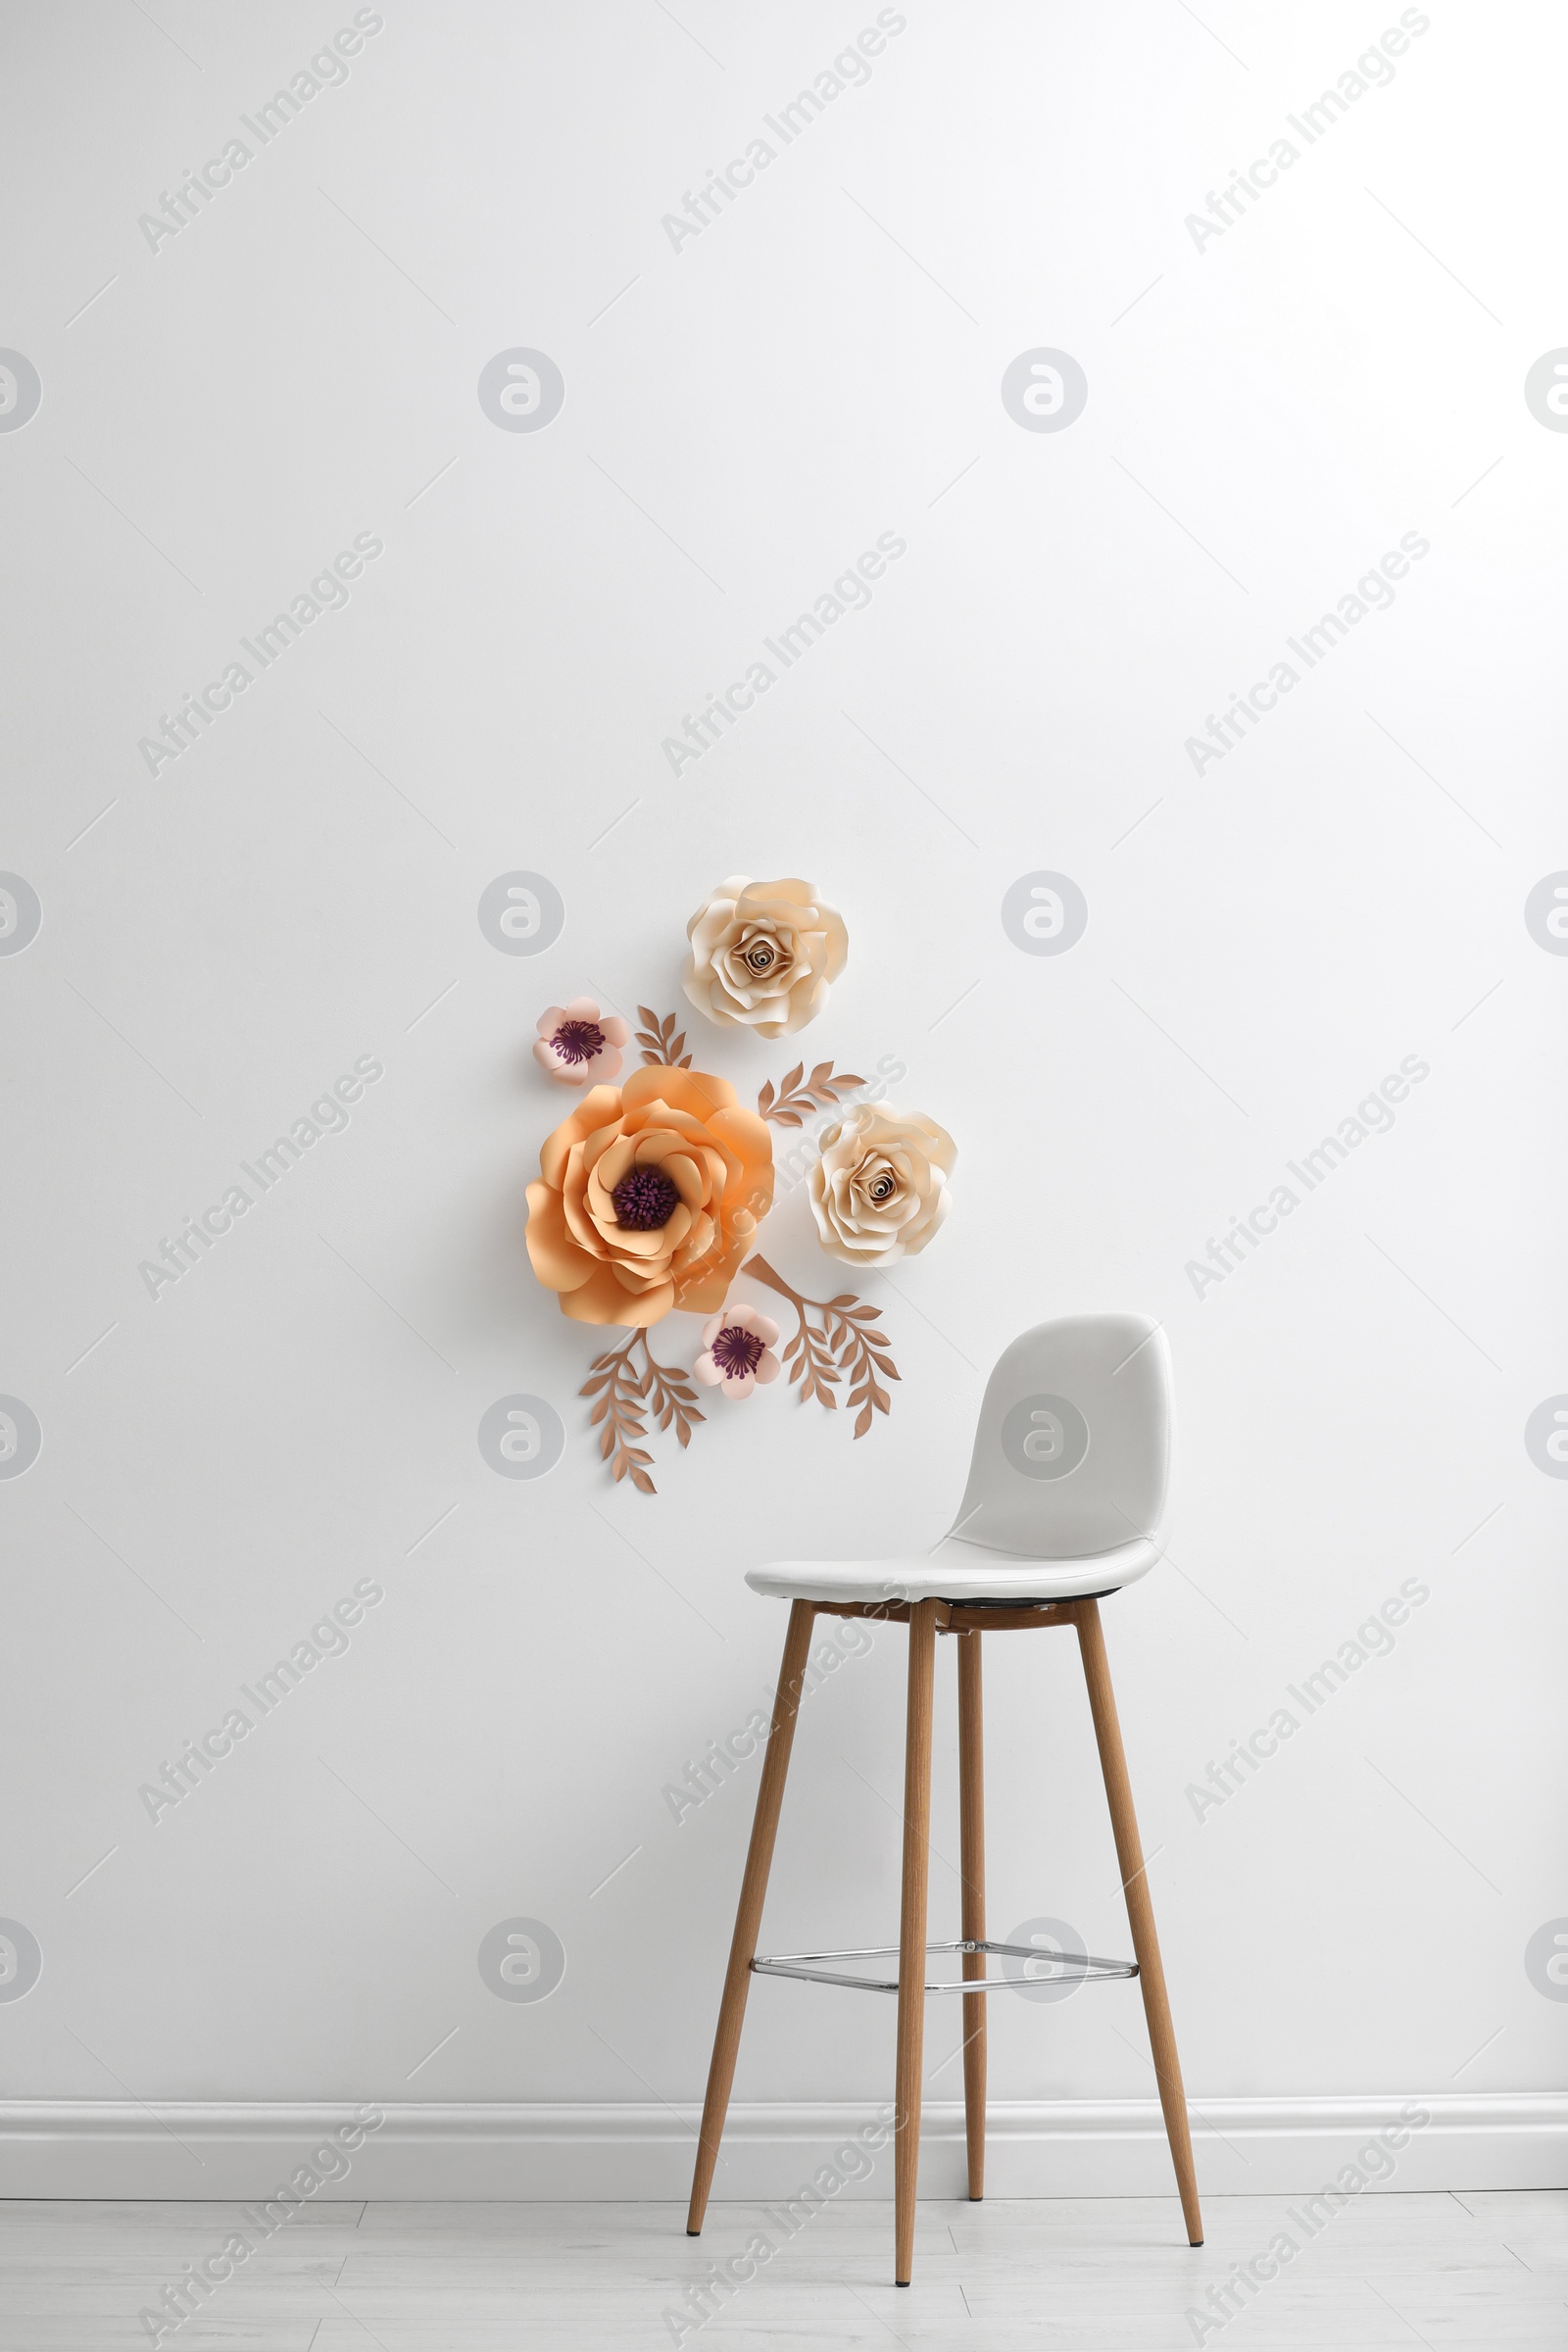 Photo of Stylish room interior with floral decor and bar stool